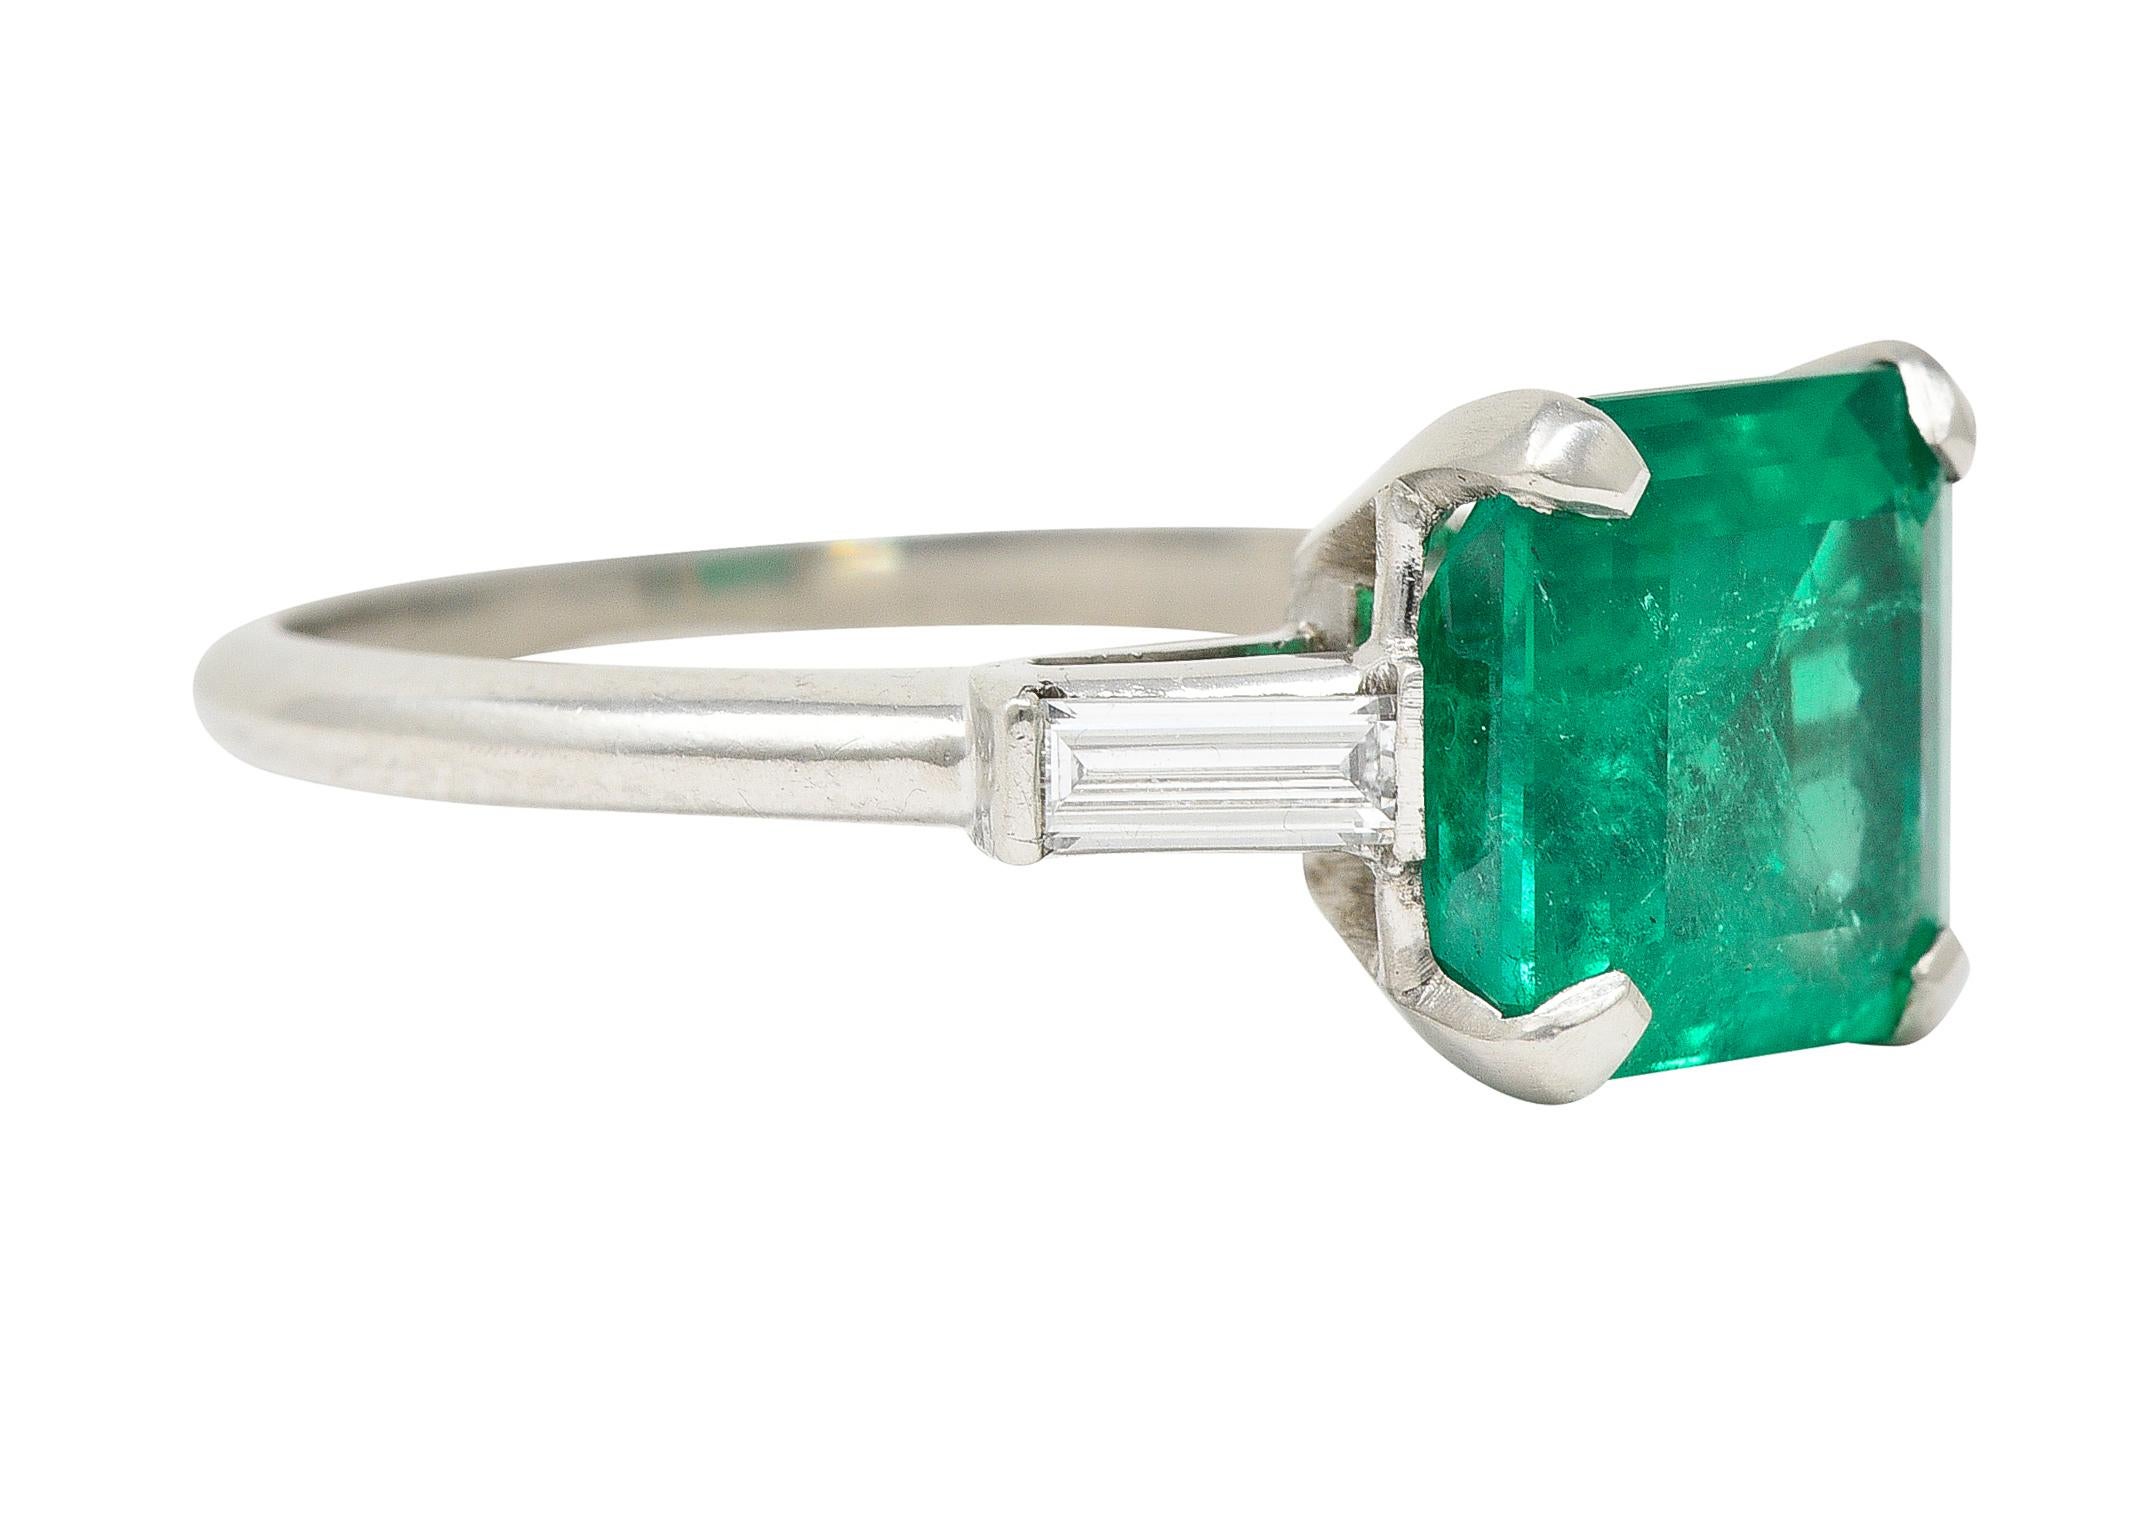 Centering a square step-cut emerald weighing 3.24 carats - transparent medium green. Natural Colombian in origin with F1 clarity enhancements - prong set in basket. Flanked by baguette cut diamonds bar set East to West. Weighing approximately 0.24